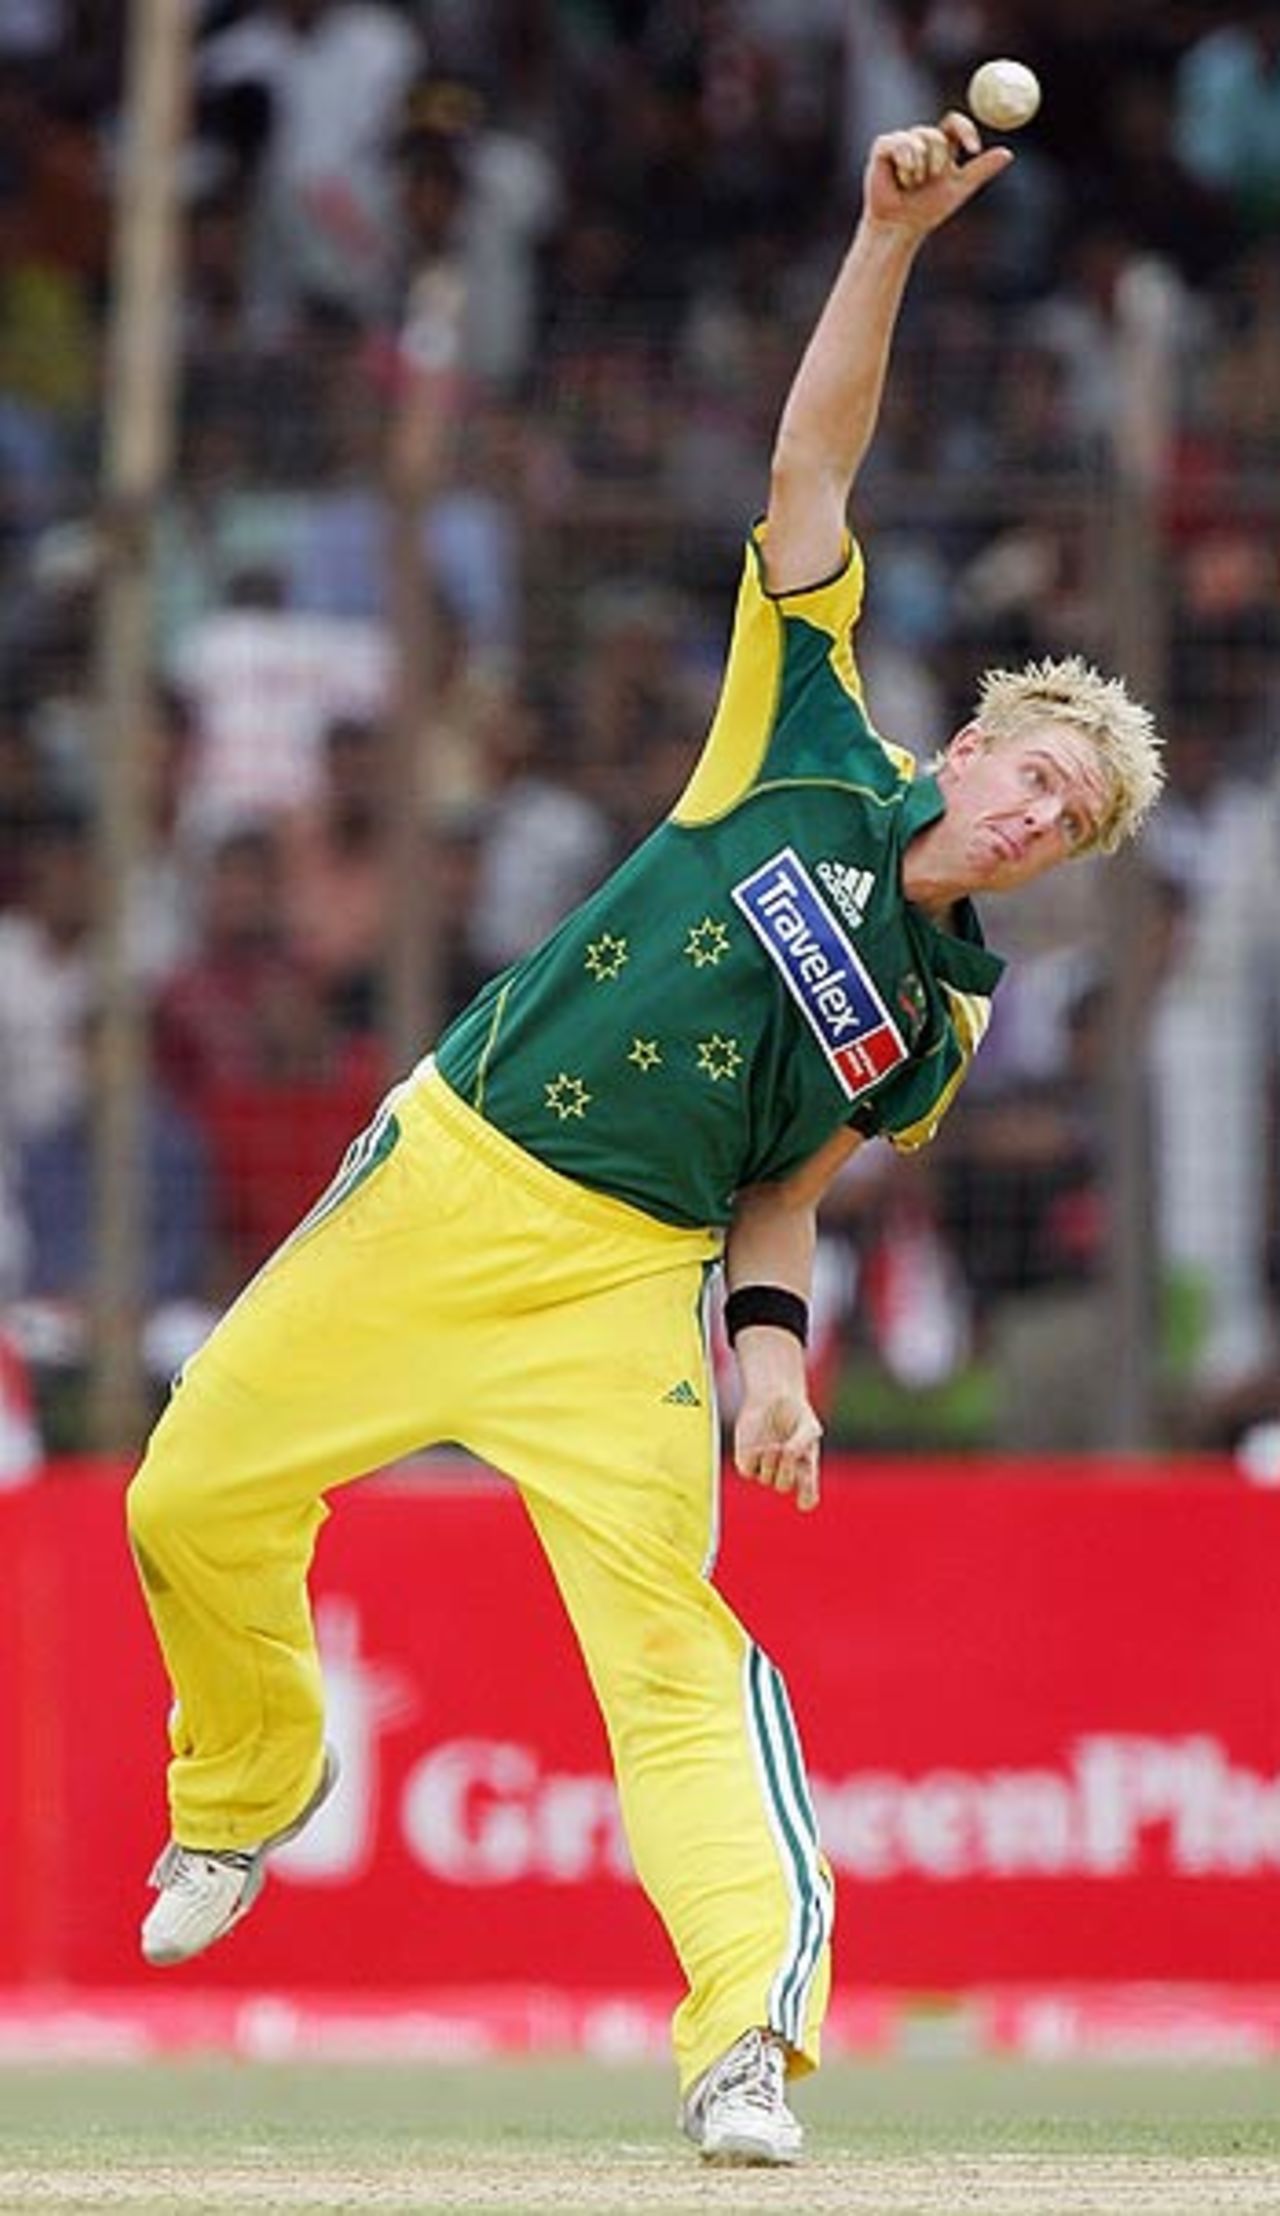 Dan Cullen in action on his one-day debut, Bangladesh v Australia, 1st ODI, Chittagong, April 23, 2006